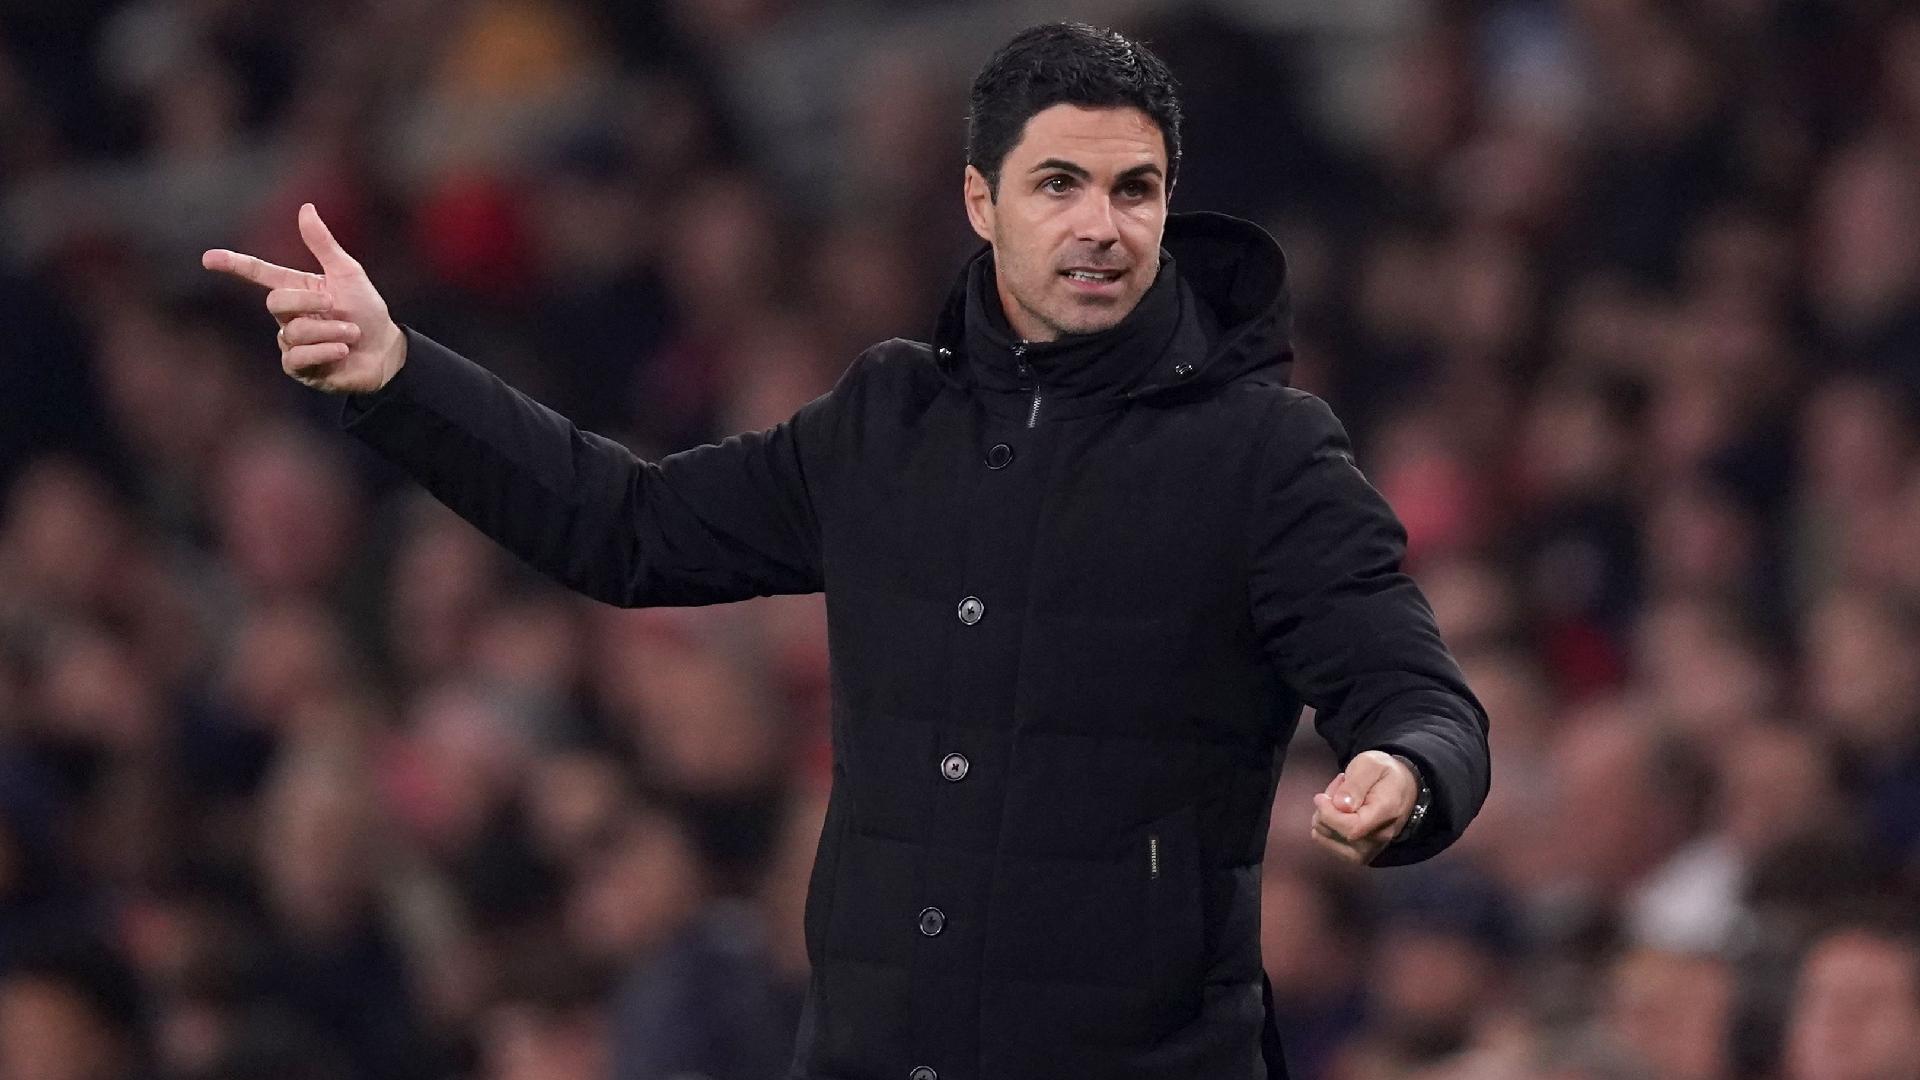 Mikel Arteta wants Arsenal's players to be fully focused on the run-in